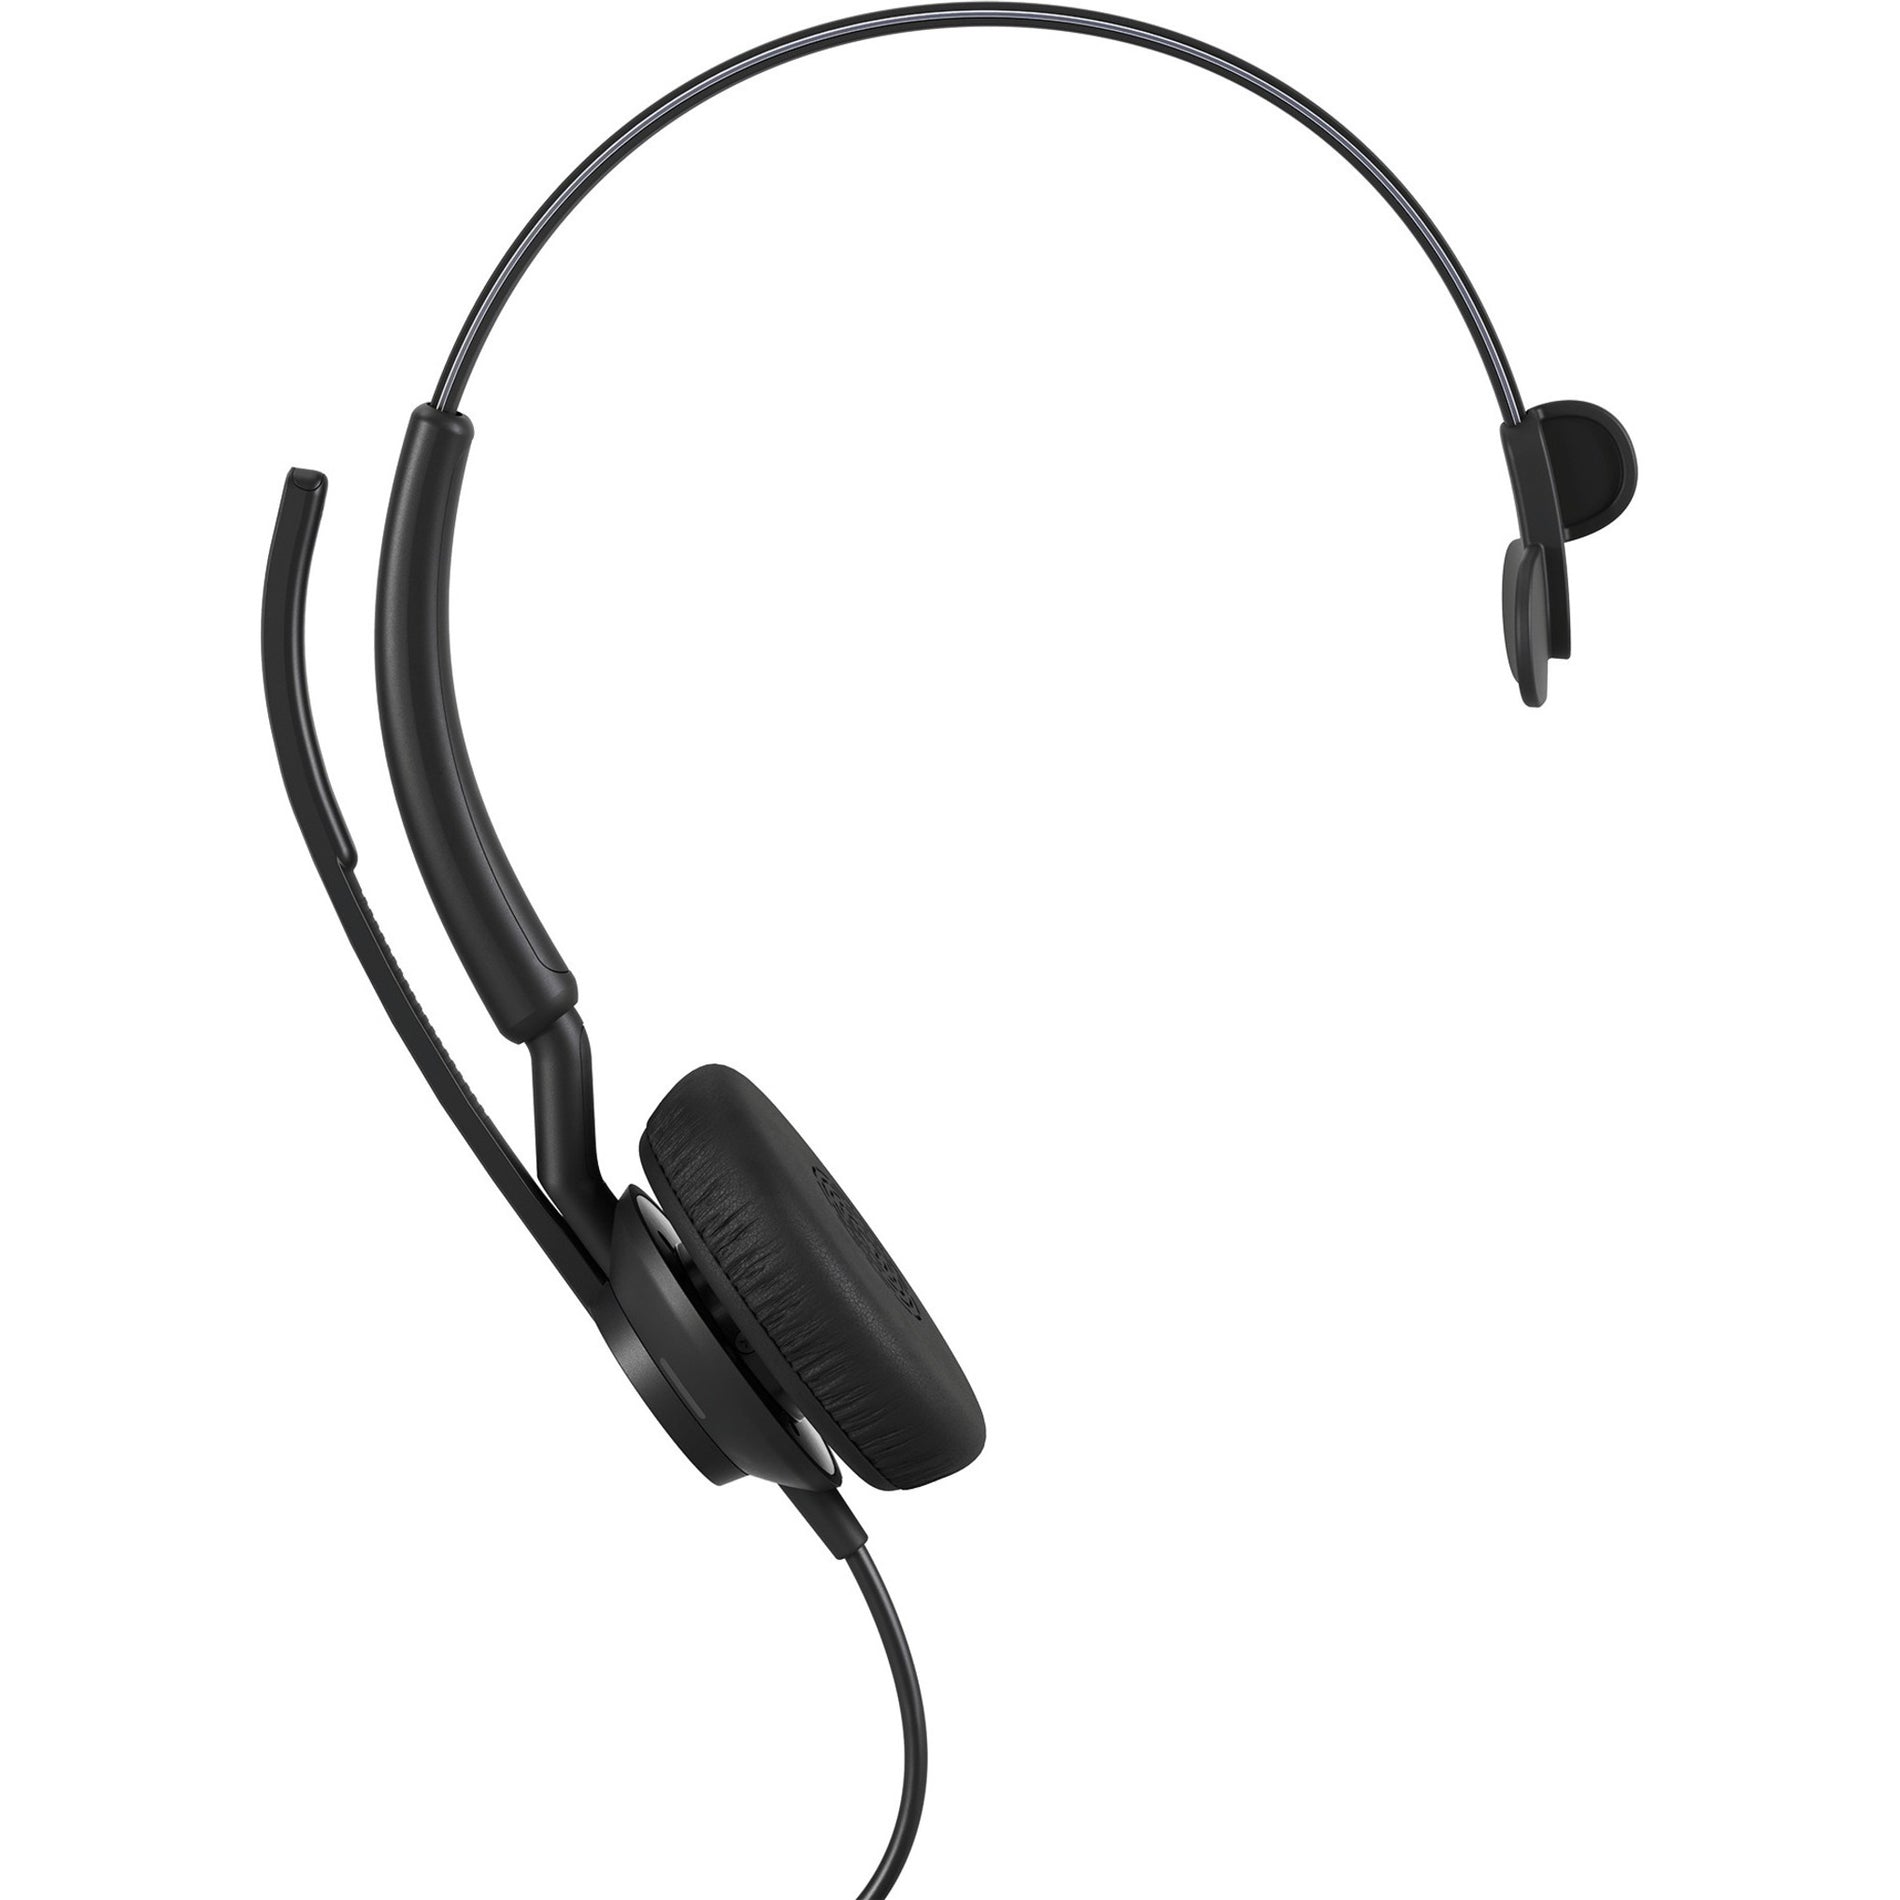 Jabra 4093-419-279 ENGAGE 40 Headset, Over-the-head USB Type A Wired Mono Headset with Noise Isolation, Comfortable Design, and 3-Year Warranty